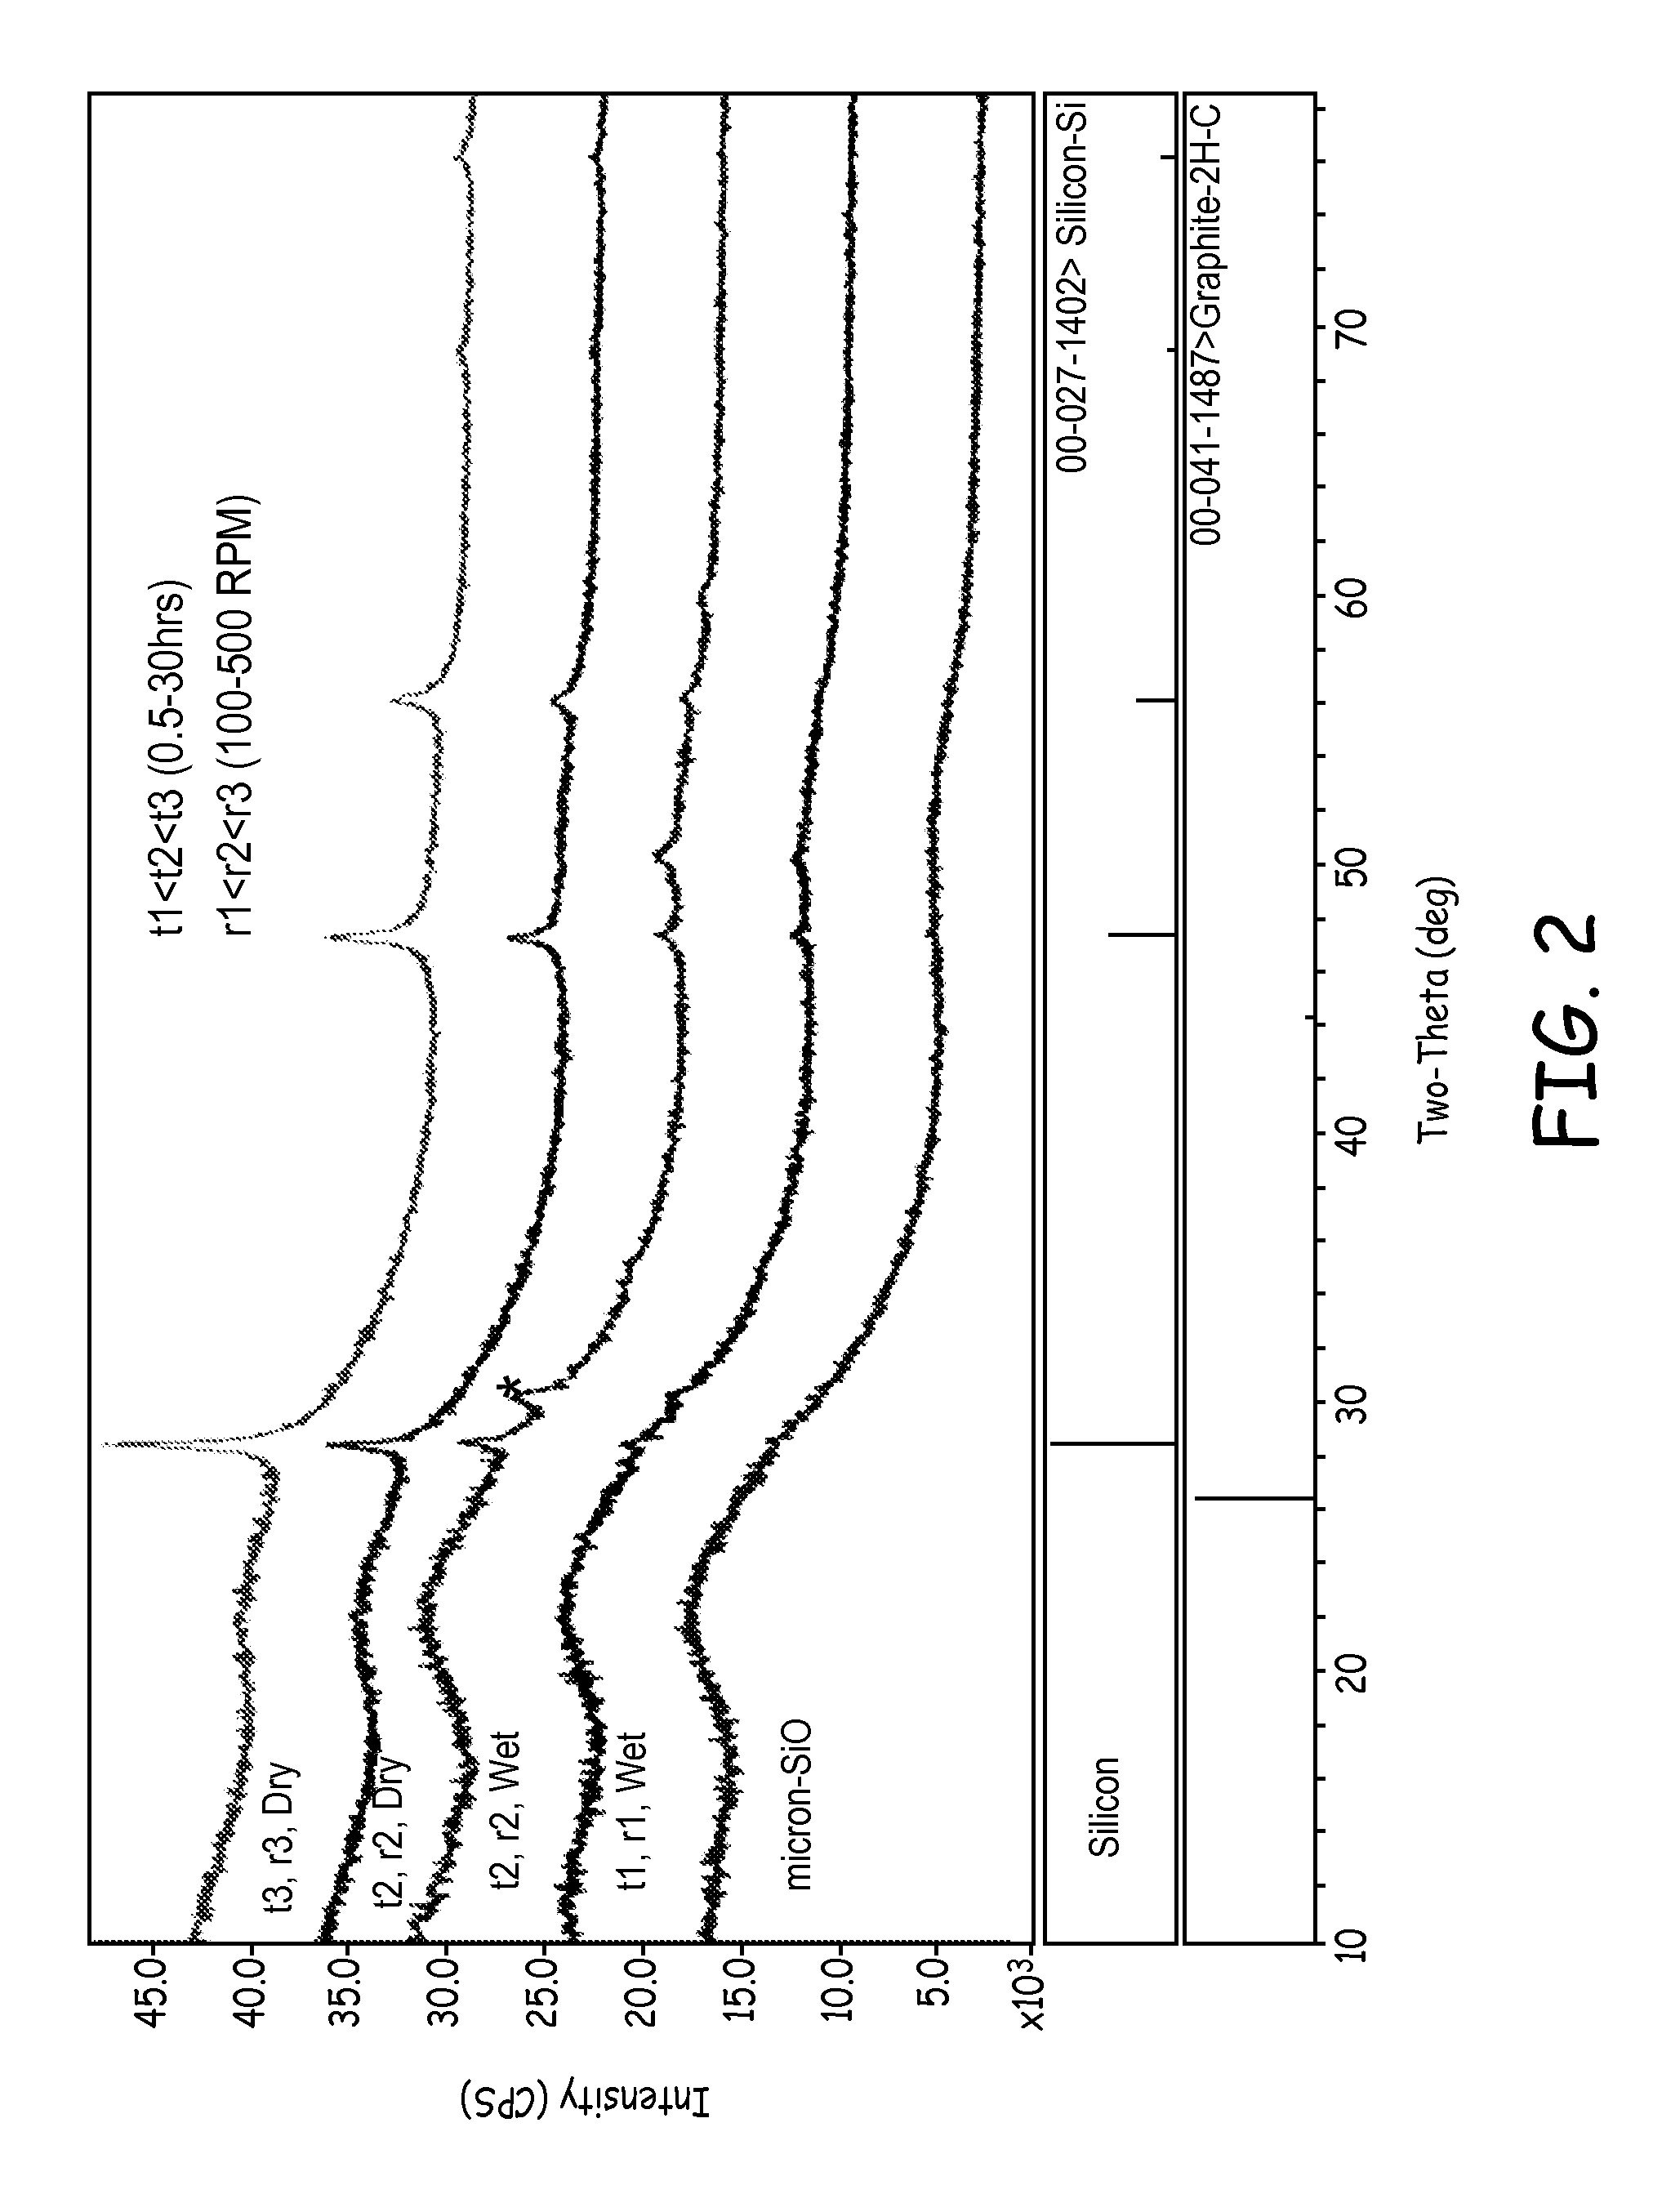 Silicon-silicon oxide-carbon composites for lithium battery electrodes and methods for forming the composites